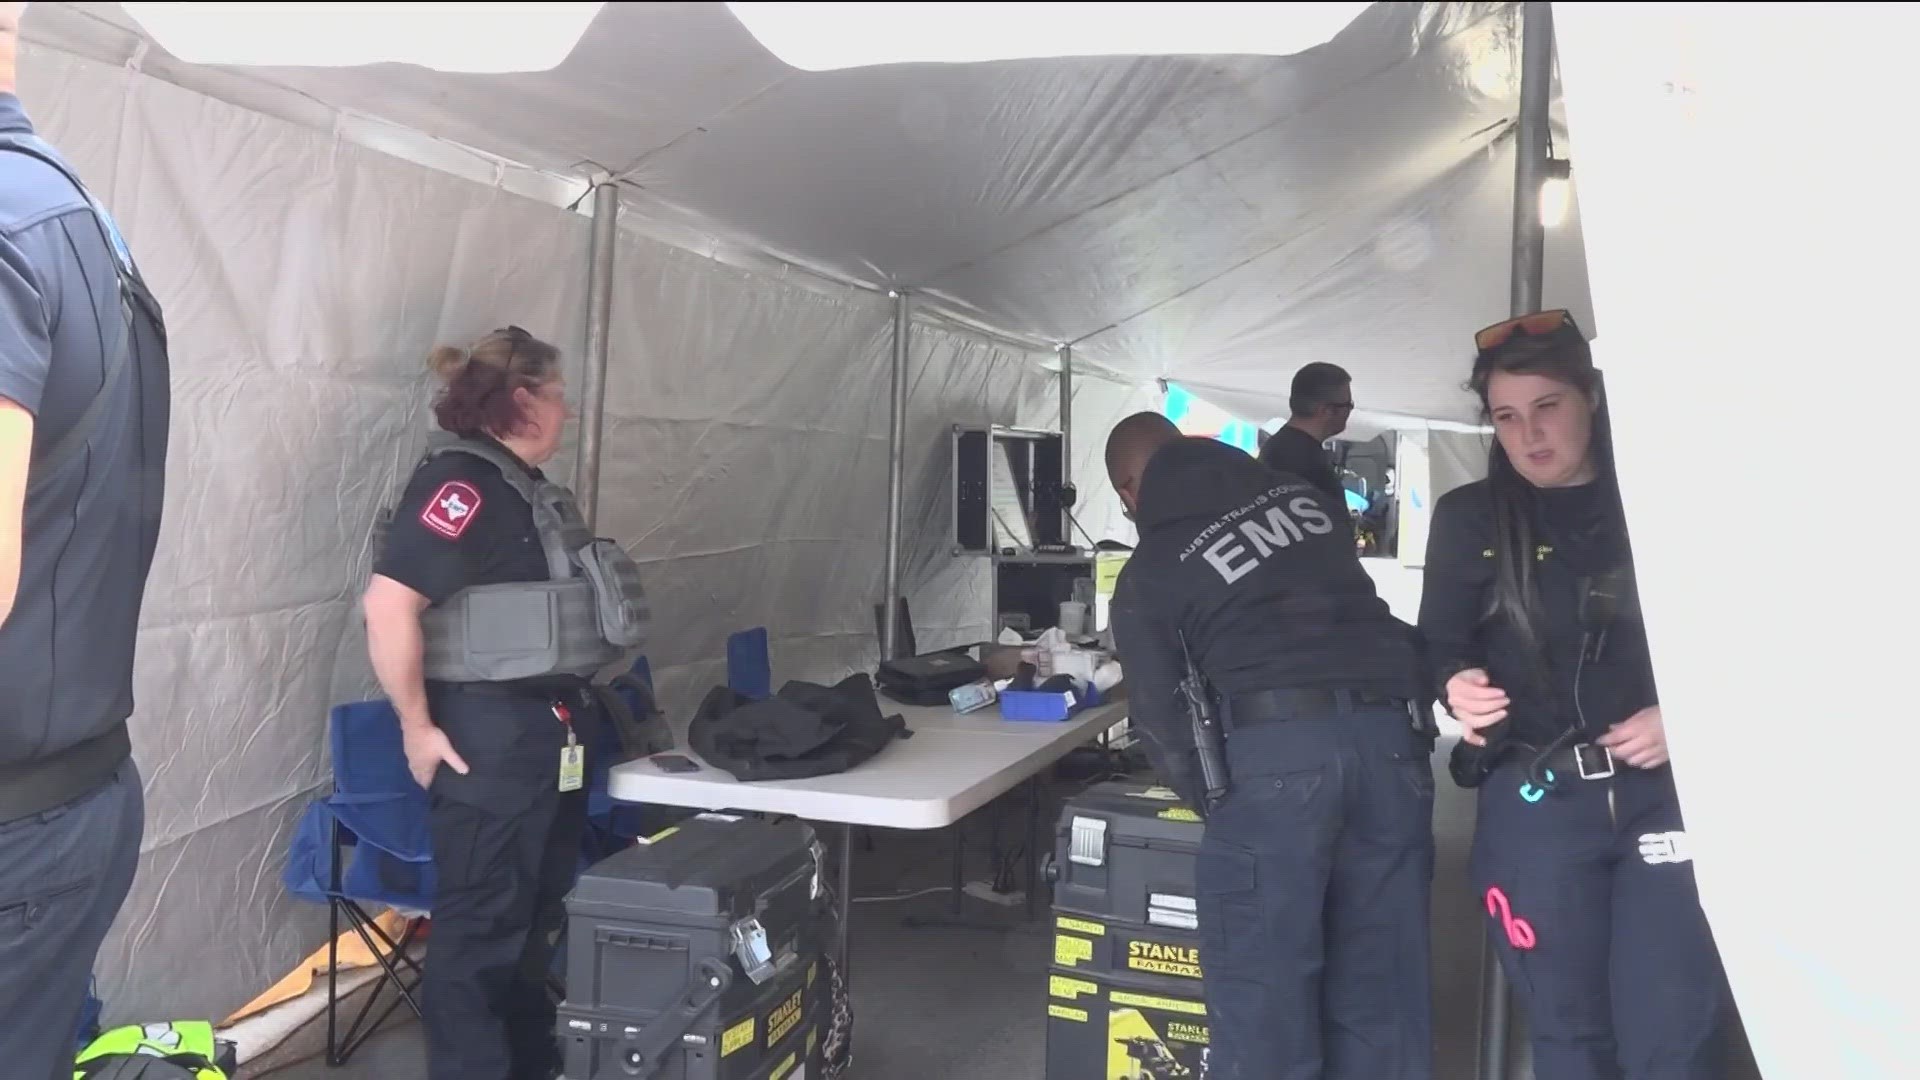 As South by Southwest continues, first responders are showing us how they're keeping visitors safe.